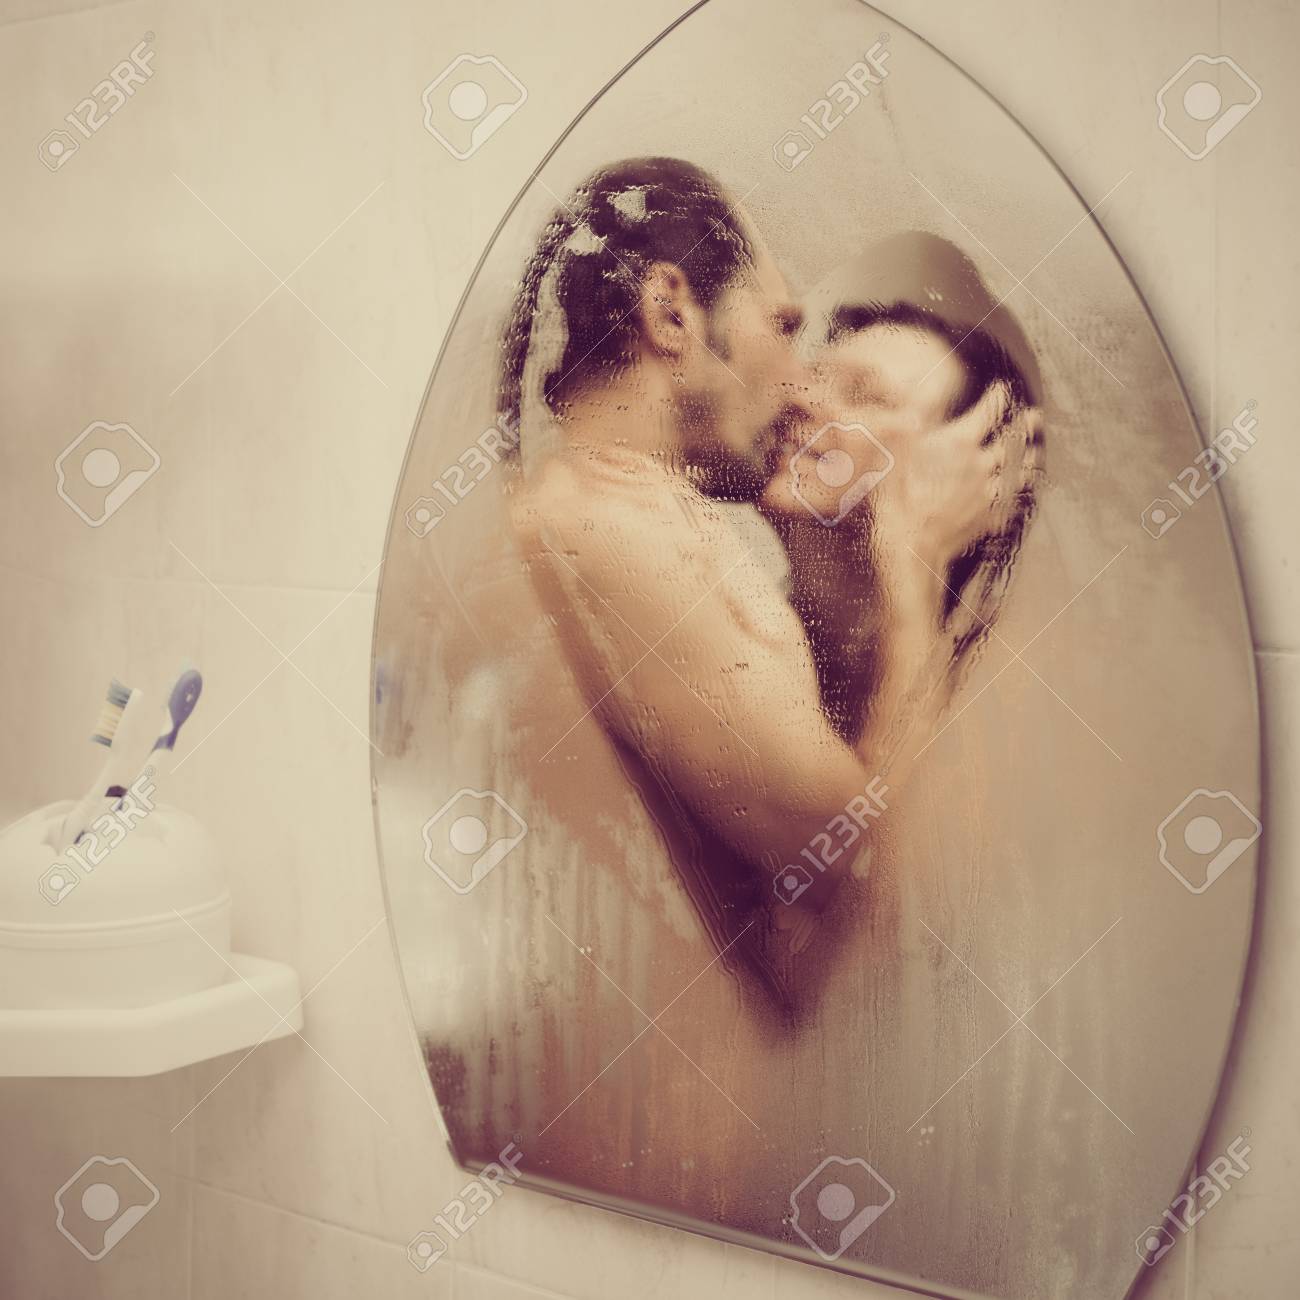 christina napoli share people kissing in the shower photos